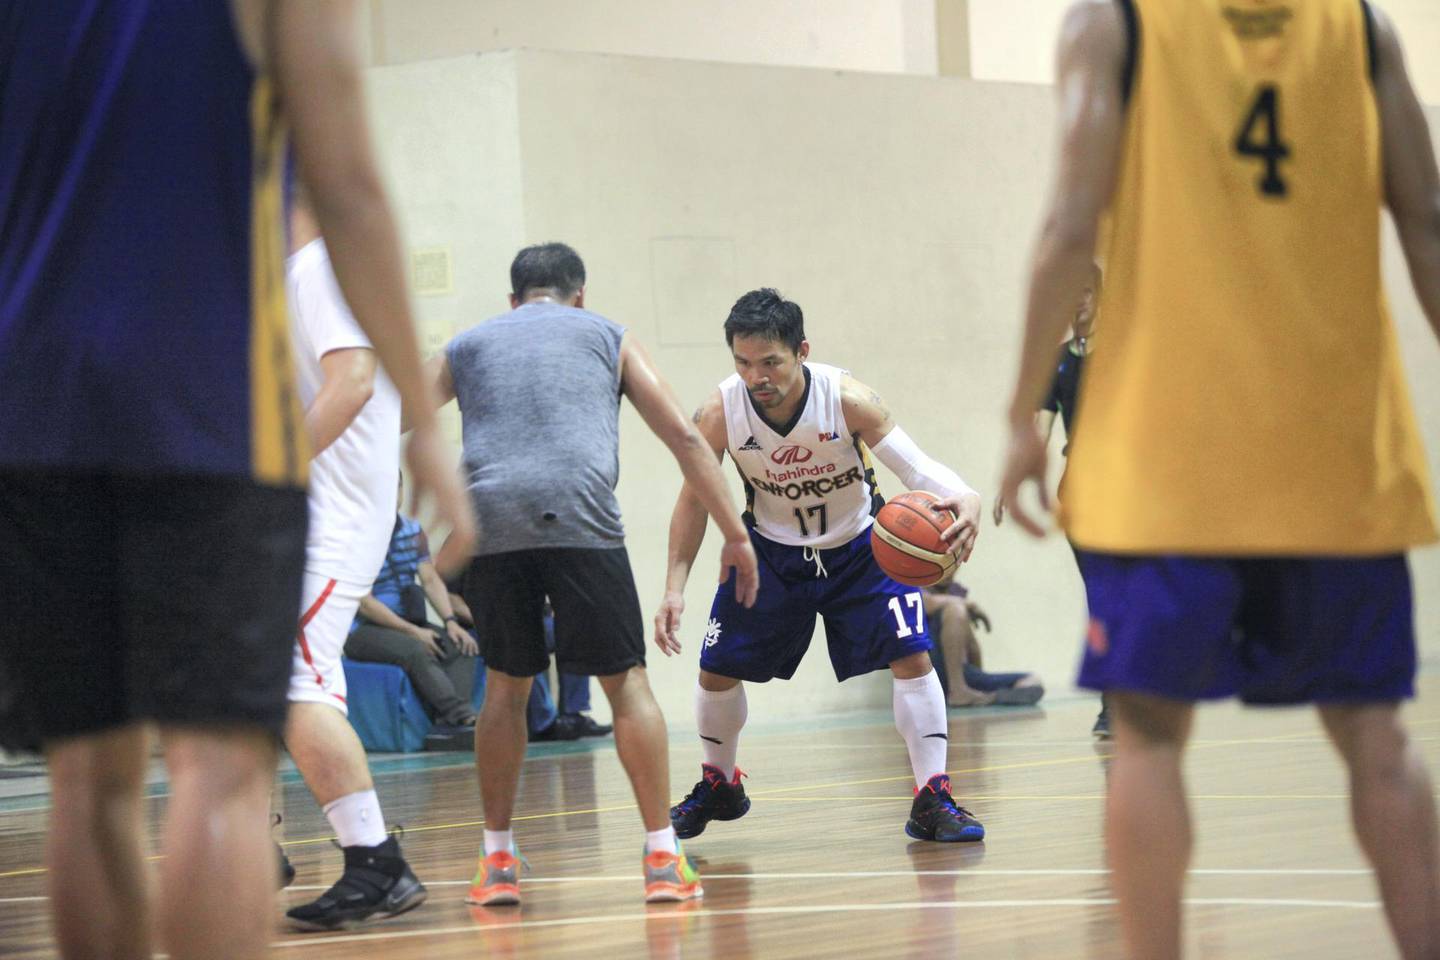 Eight-division boxing champion and Philippine Senator Manny Pacquiao plays a few games of basketball as an alternative to his regular boxing training routine in Paranaque, Metro Manila.